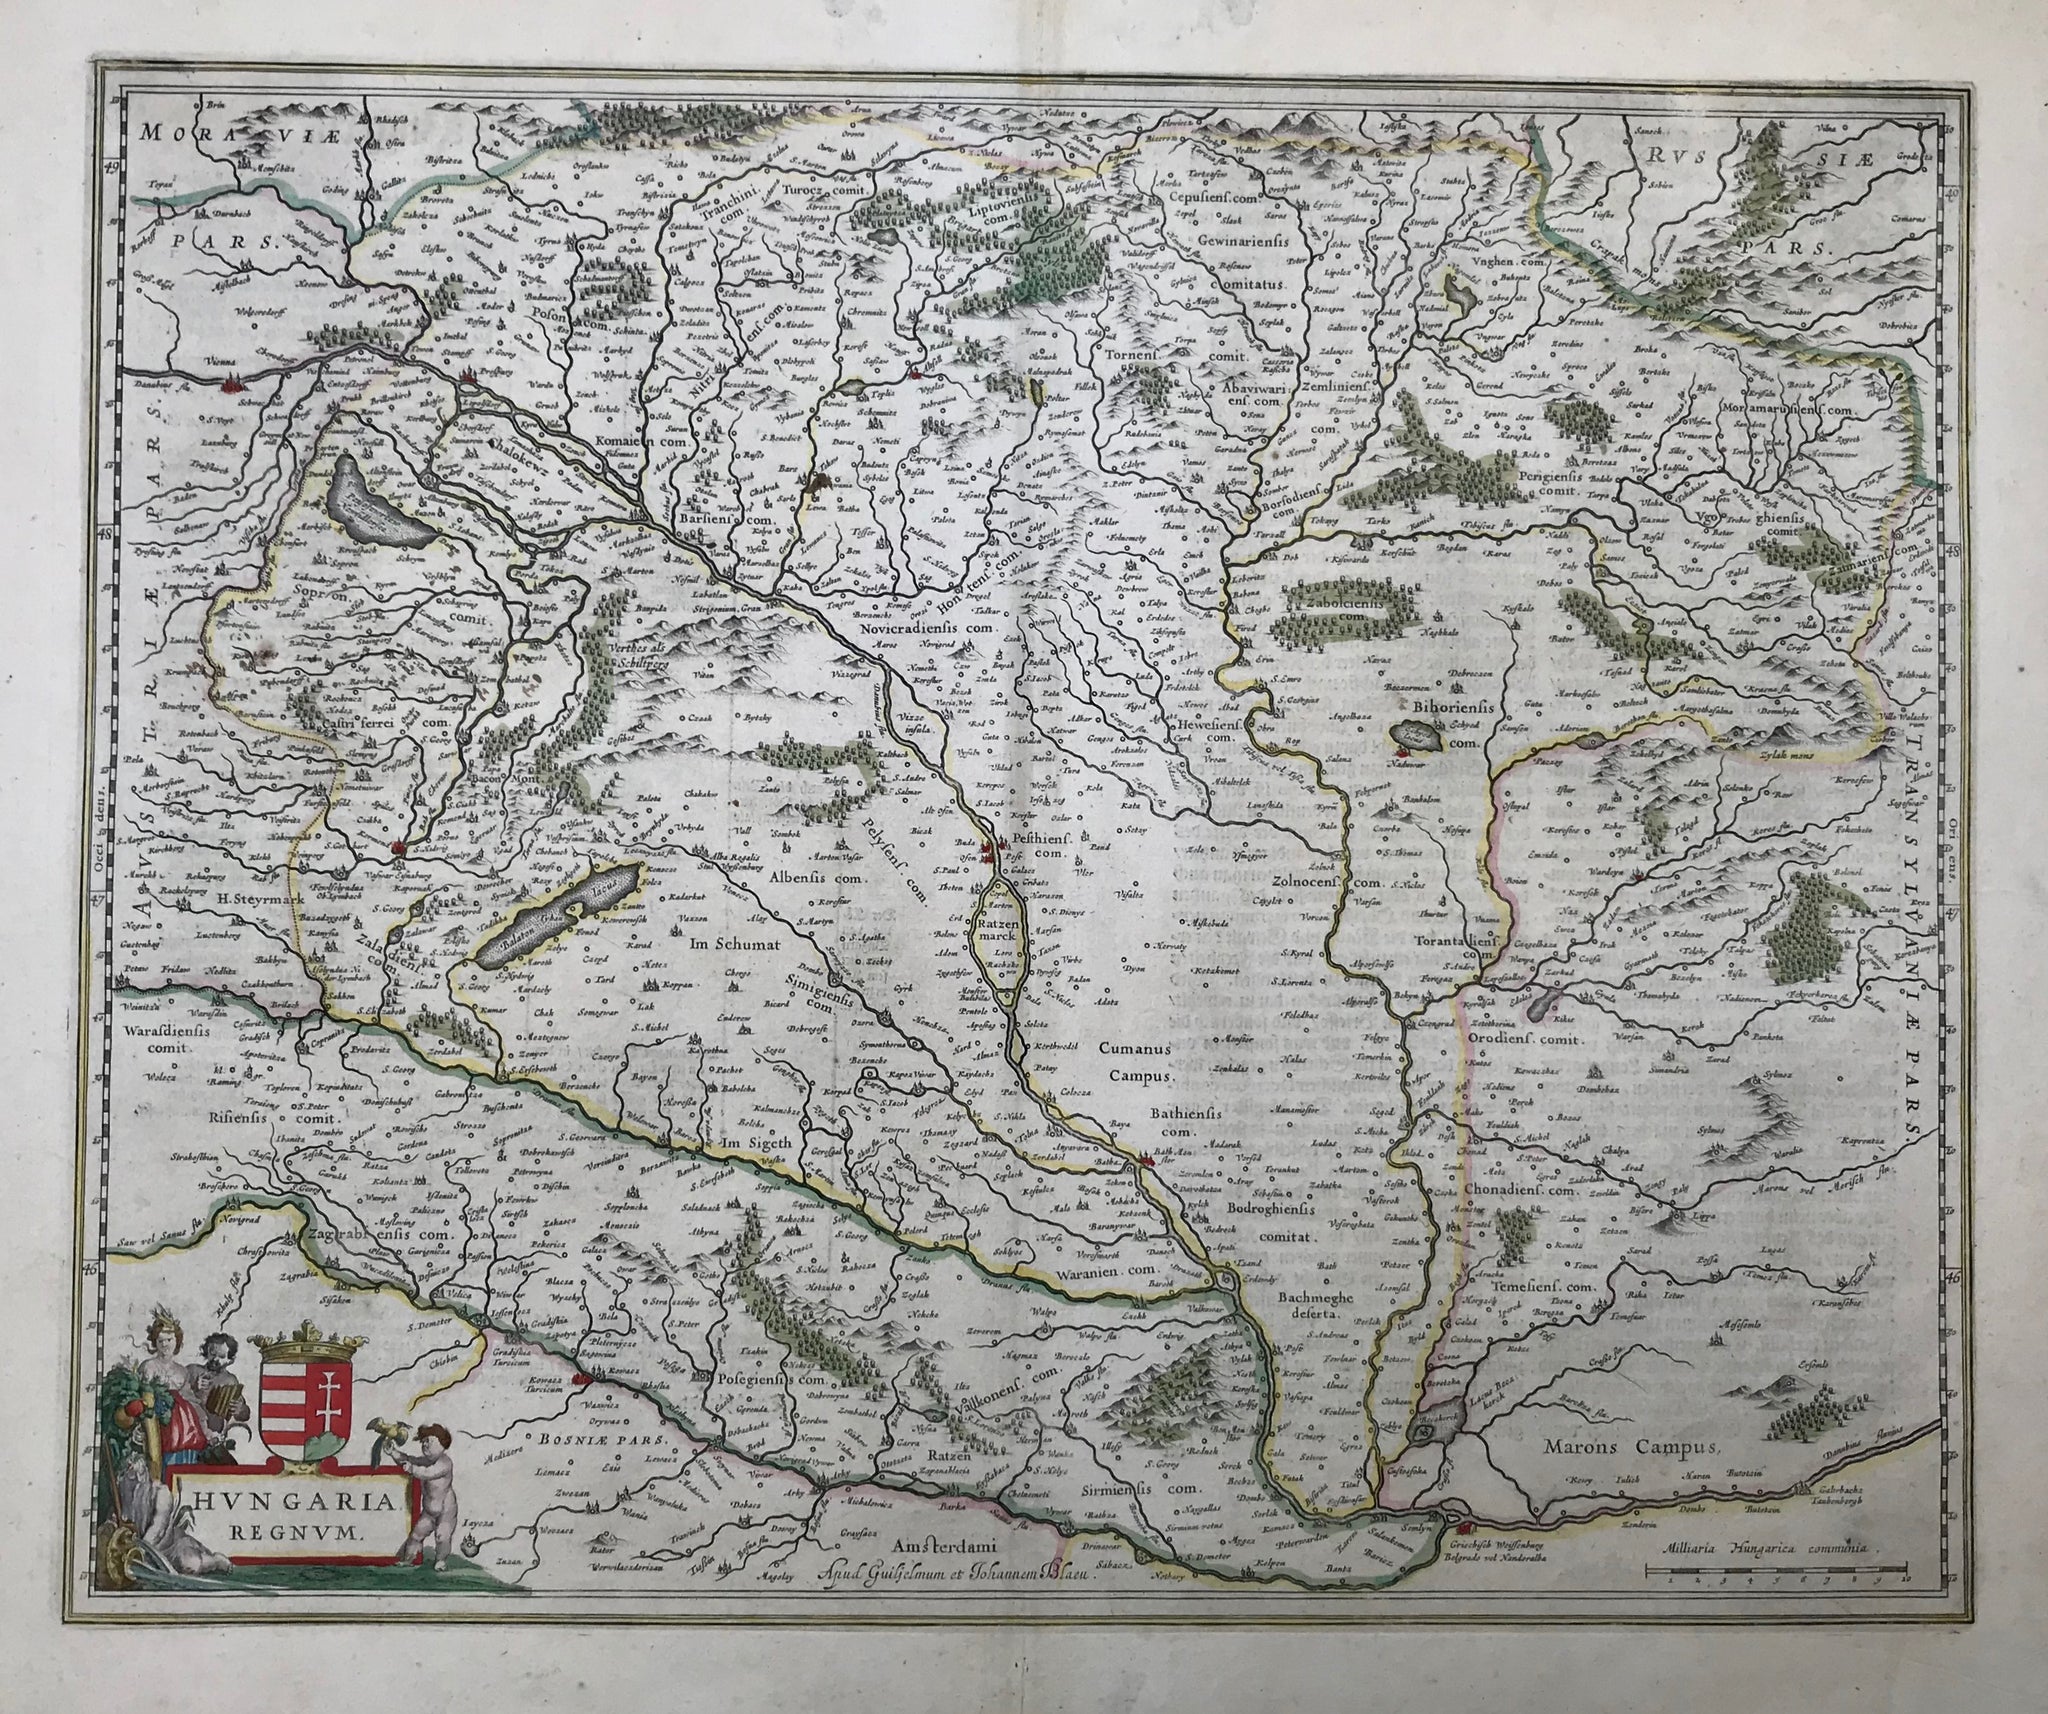 "Hungaria Regnum". Copper etching published by Wilhelm and Johannes Blaeu. Amsterdam, ca. 1650.  Map shows the area from From Vienna to Temswar, from the Carpathian mountains to Belgrade. On the reverse side is text in German.